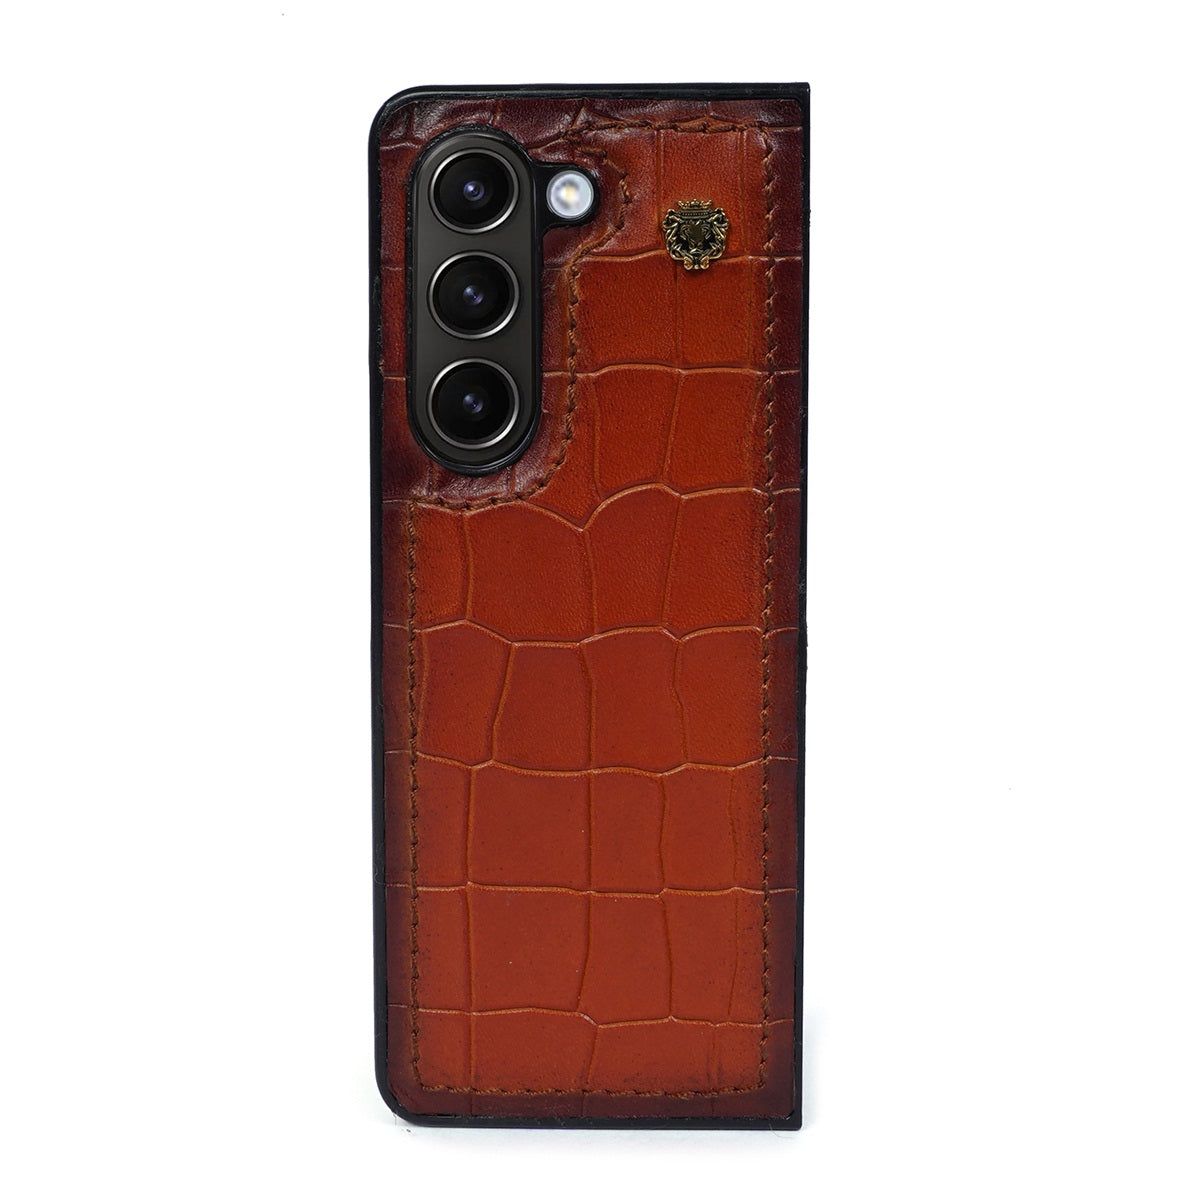 Fold 5 Mobile Case Cover with Tan Deep Cut Croco Textured Leather